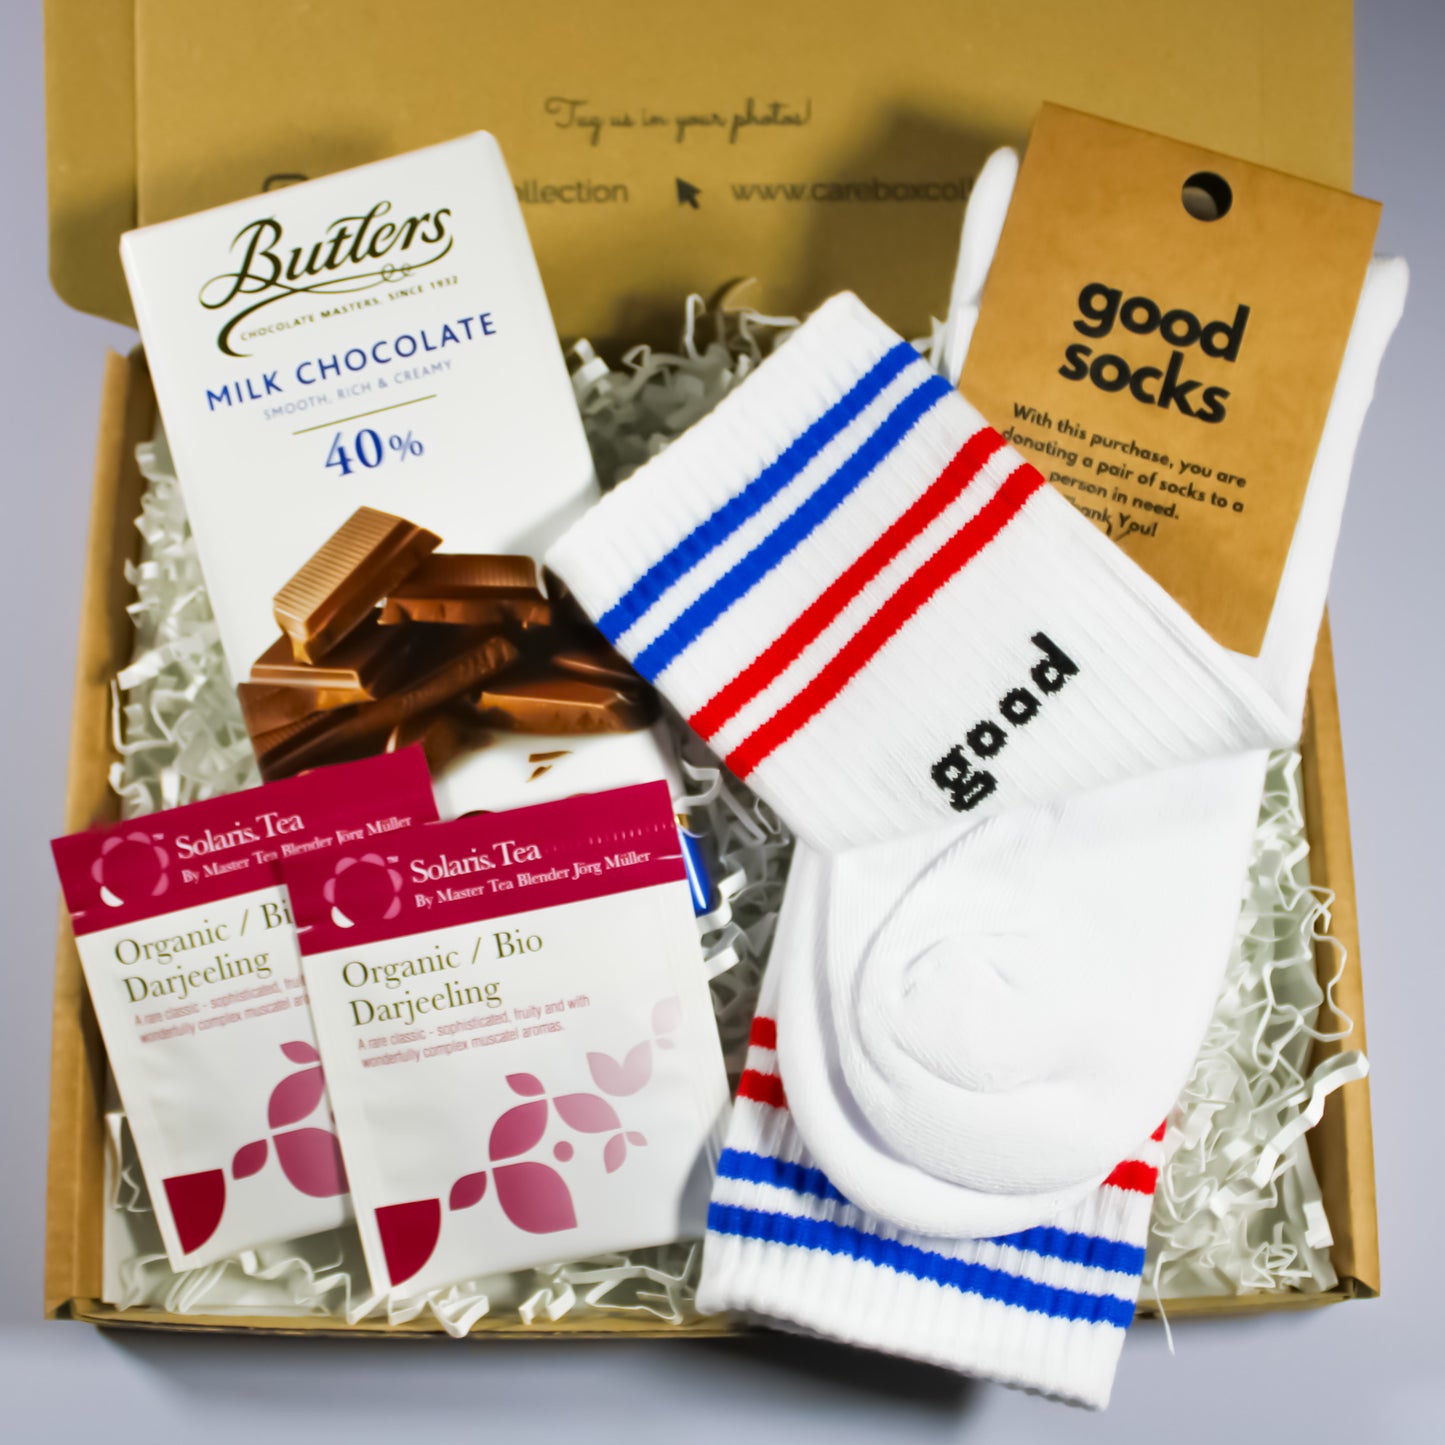 Corporate Gifts Ireland l Charity Gift